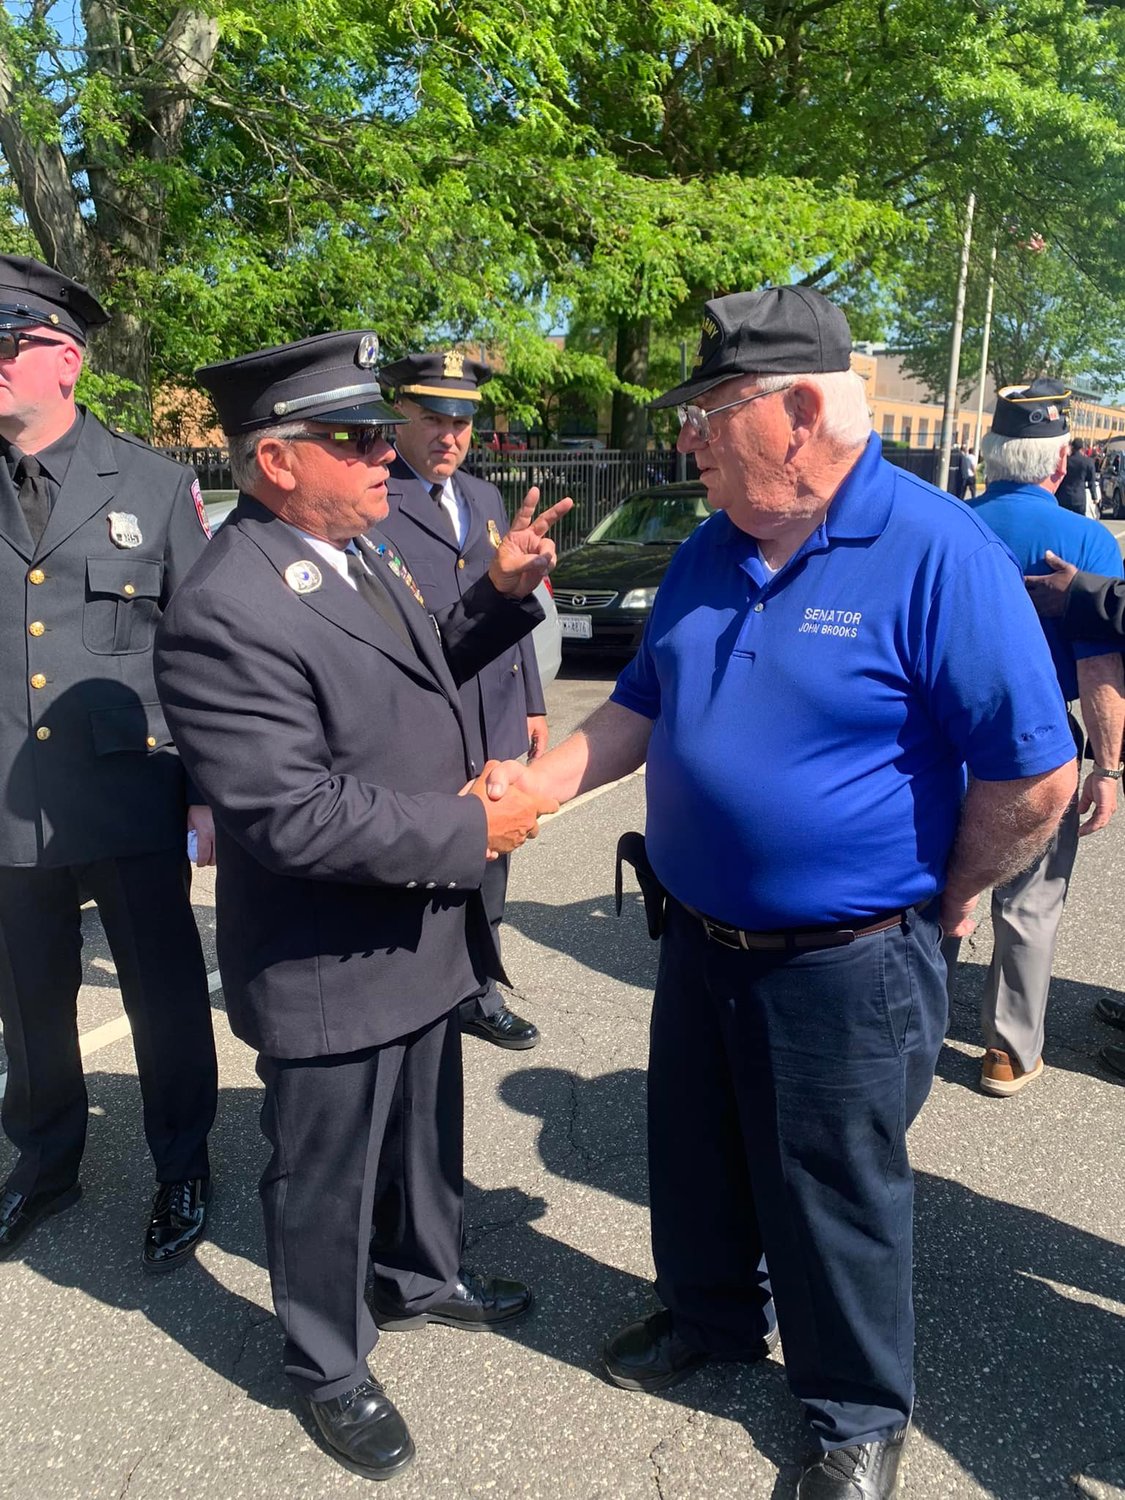 State Senator John E. Brooks greeted an official of the Freeport Fire Department on Memorial Day. Brooks has been state senator for District 8 since 2016, but under the redrawn district lines, will not run to fill the seat of the new District 5.